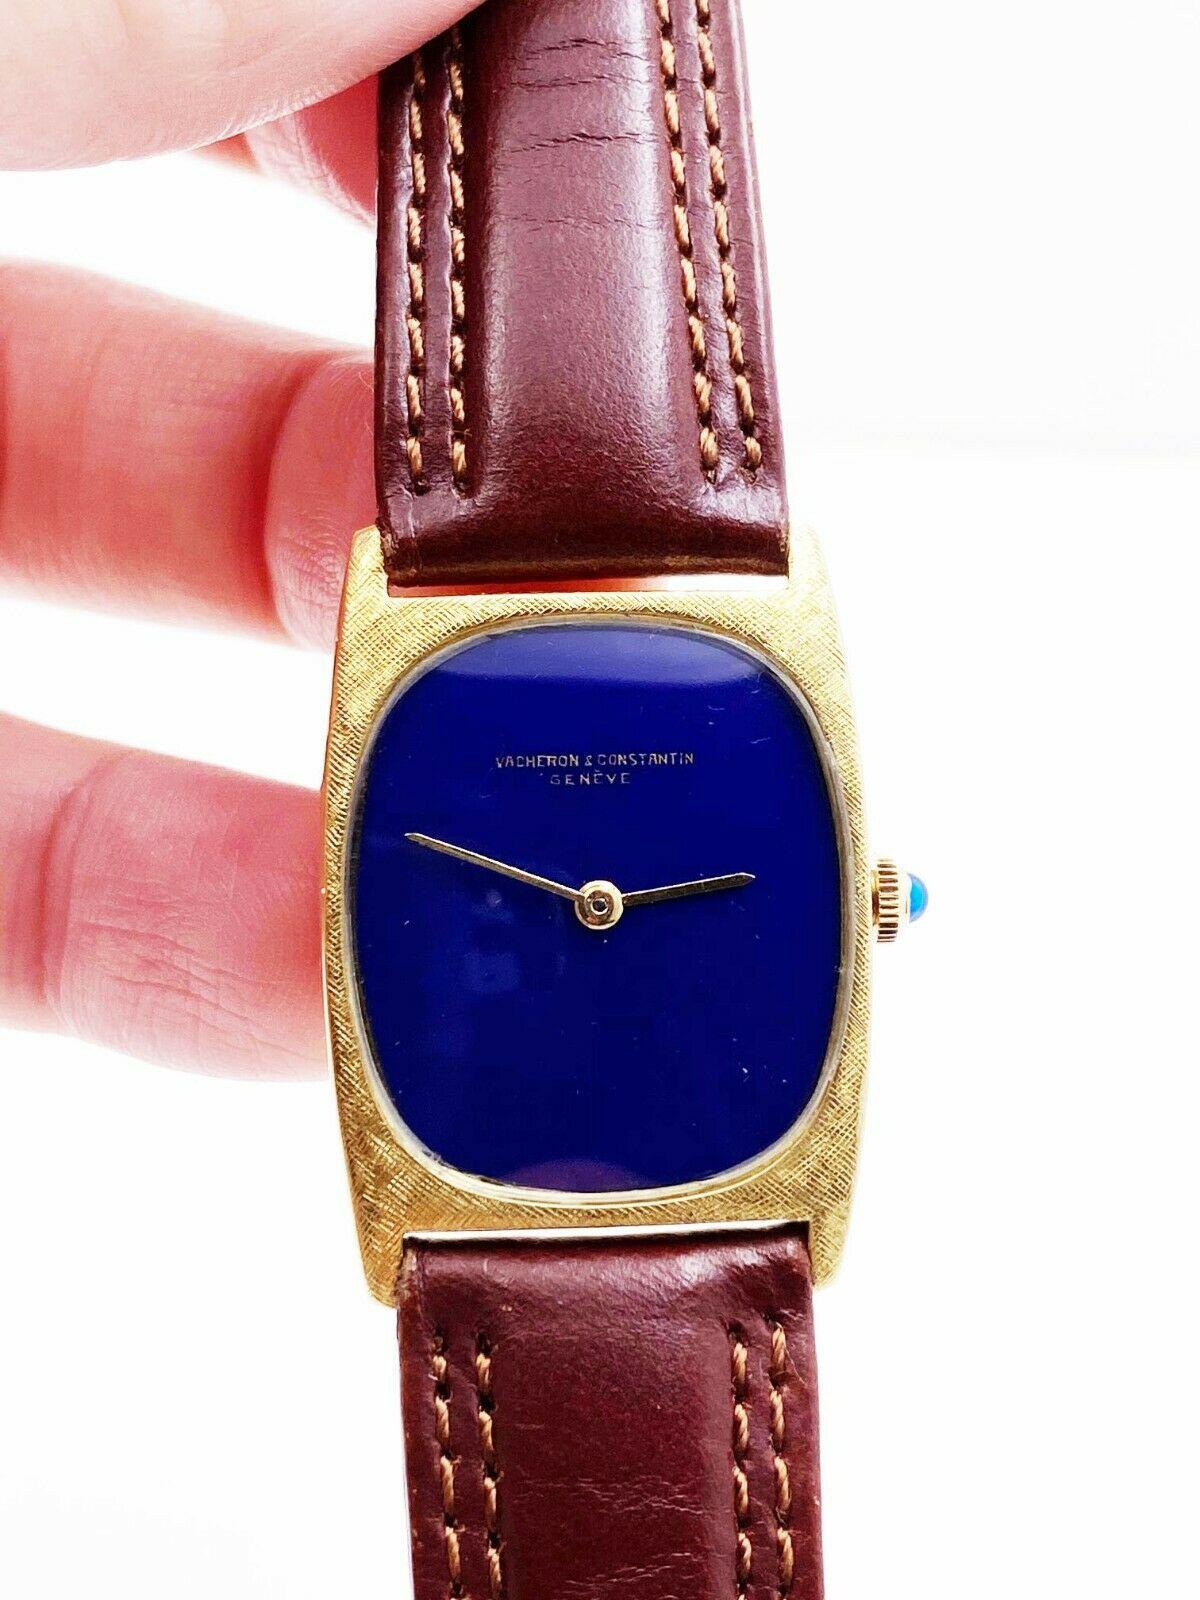 VERY RARE VINTAGE

Reference Number: 7813

Case Material:  18K Yellow Gold

Year: Estimated from the 80's

Band:  Custom Brown Leather 

Bezel: Yellow Gold

Dial: Lapis Lazuli 

 Case Size: Approximately 25mm x 36mm

Includes: 
-Elegant Watch